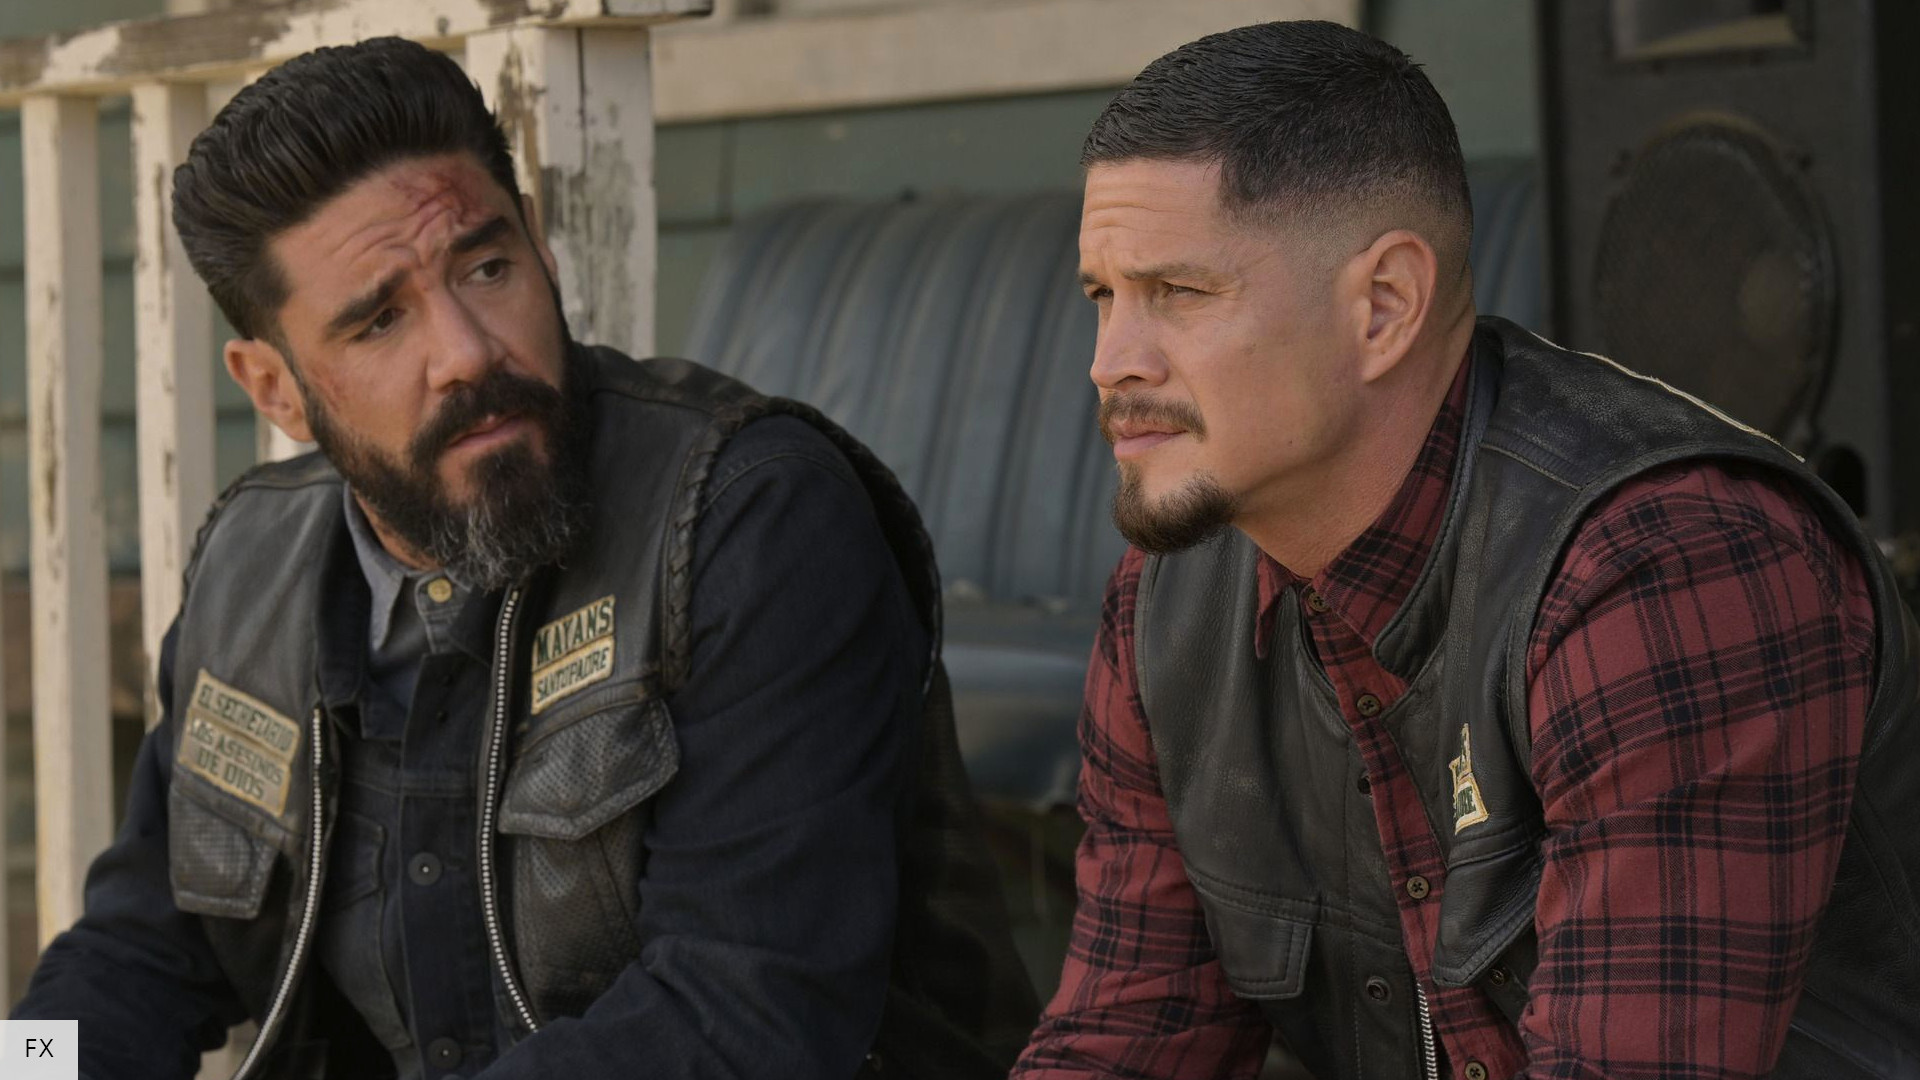 Mayans MC' Ending at FX, No Season 6 for 'Sons of Anarchy' Spinoff – TVLine